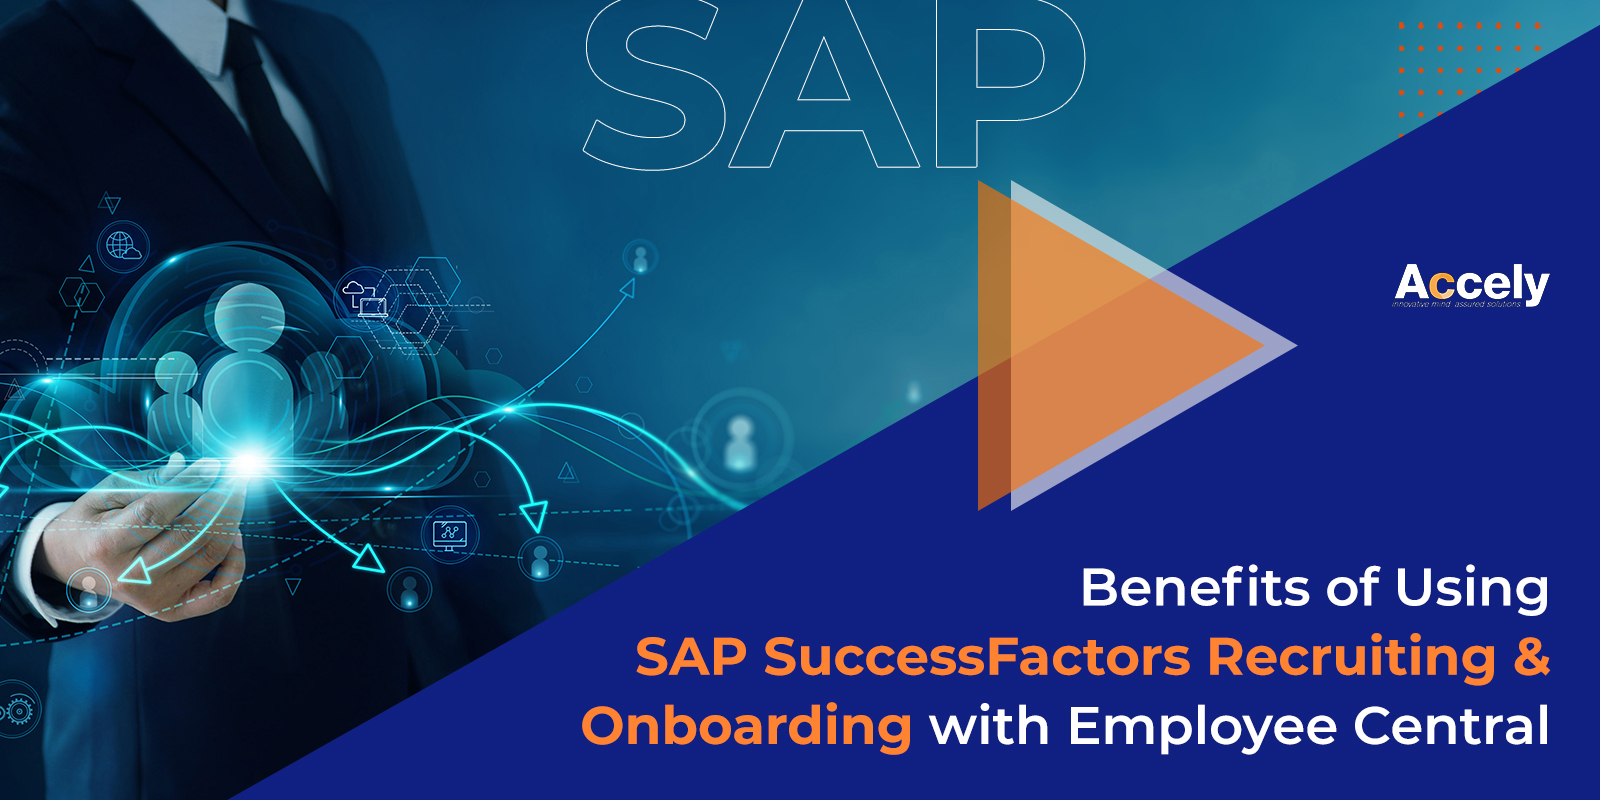 Benefits of Using SAP SuccessFactors Recruiting & Onboarding with Employee Central